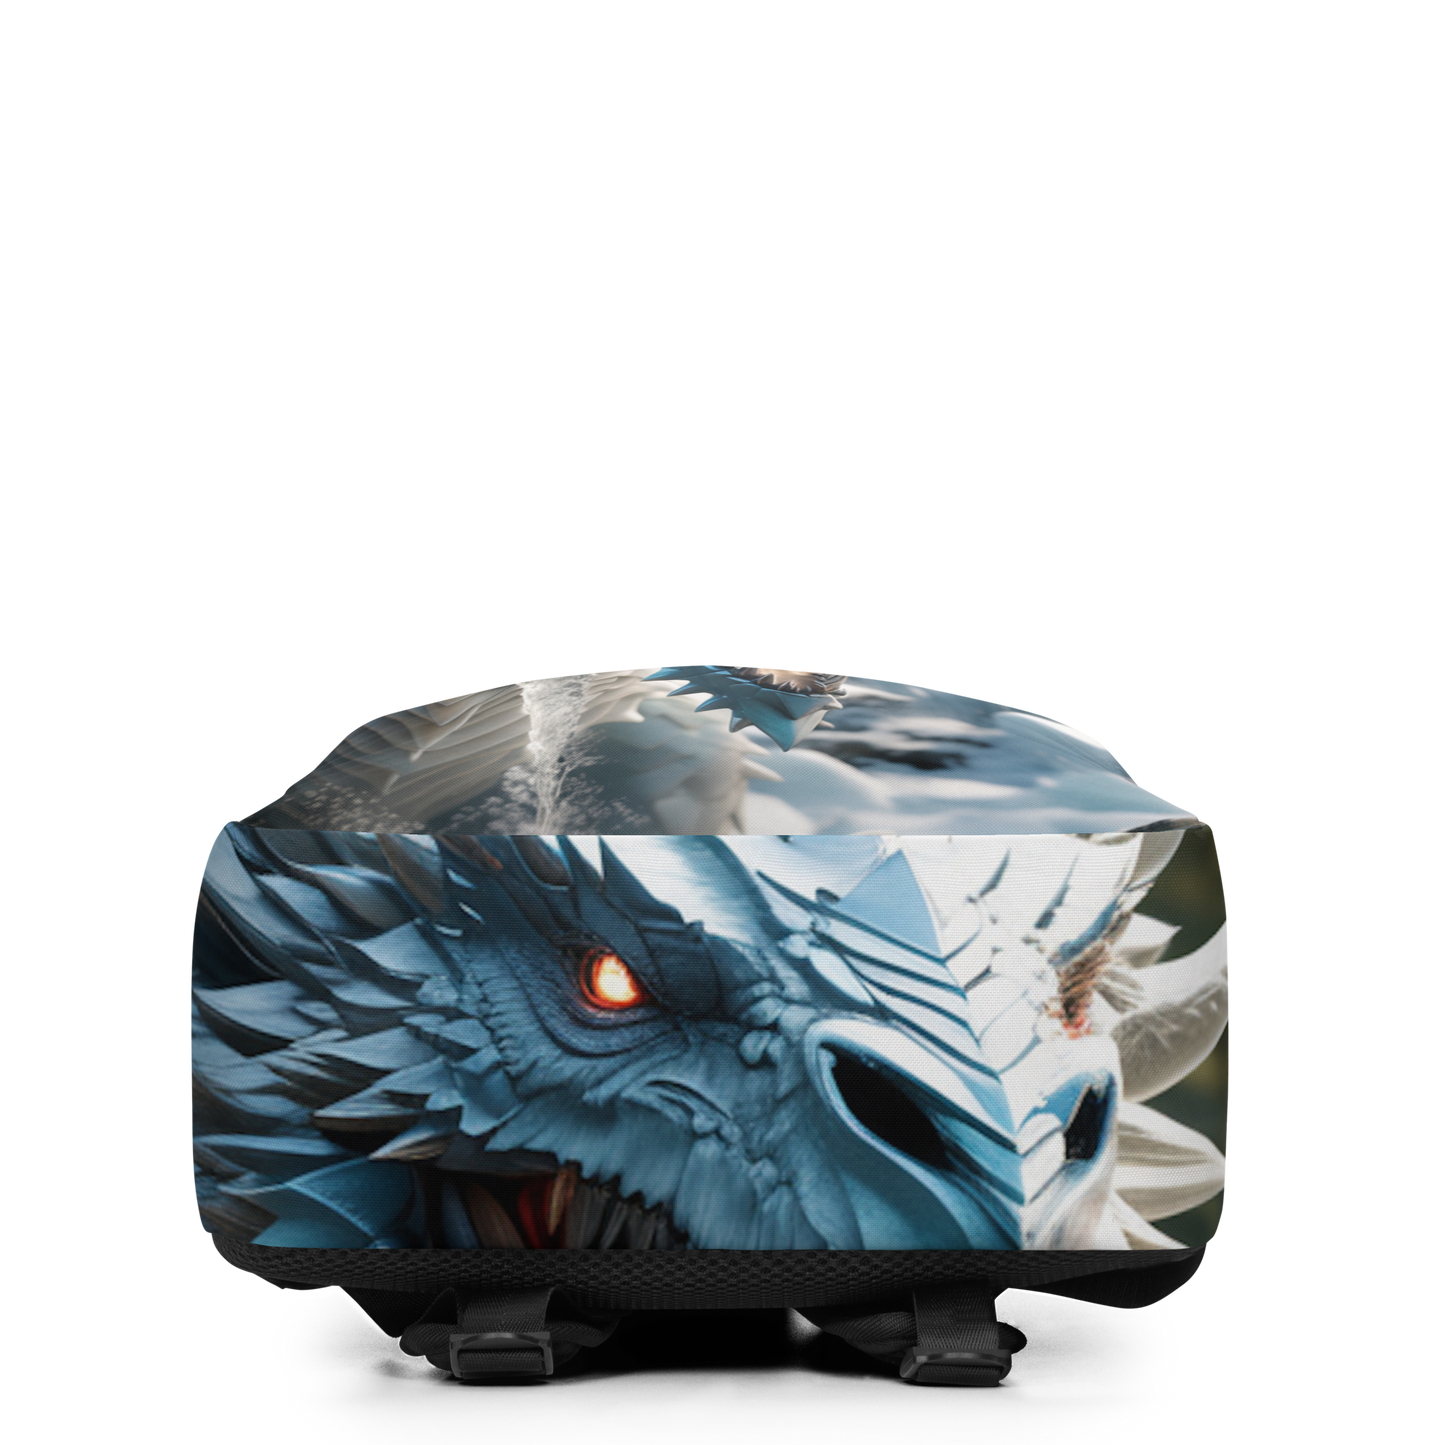 Ice Dragon Backpack